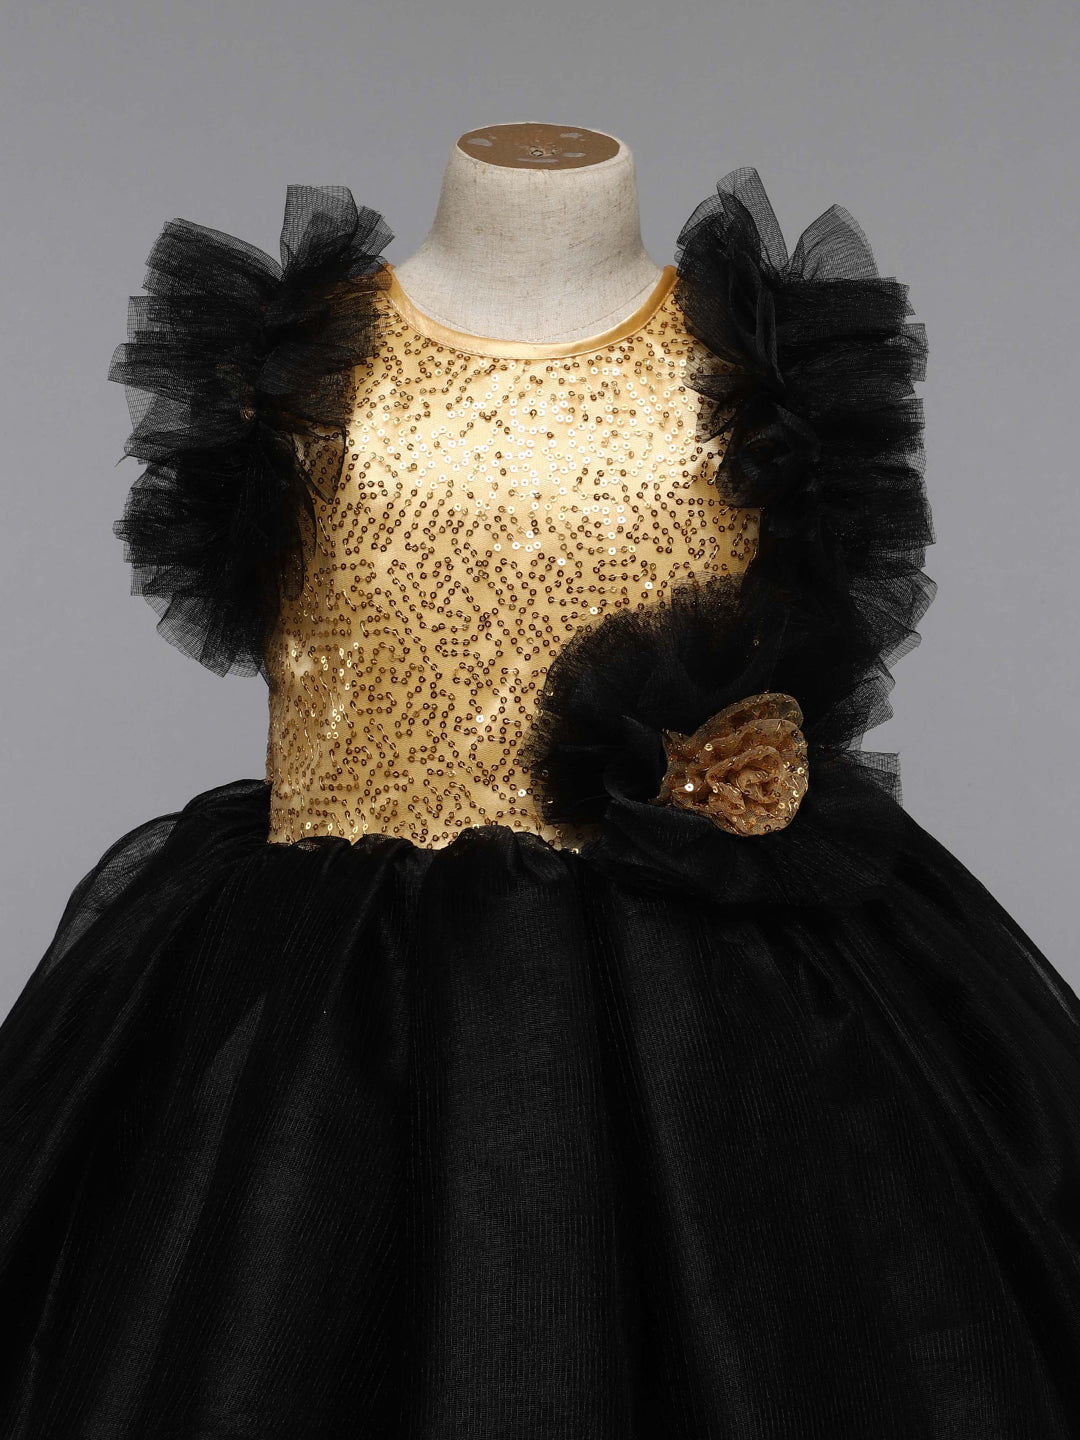 The gown features a black gold printed pattern, which adds a touch of  traditional artistry to